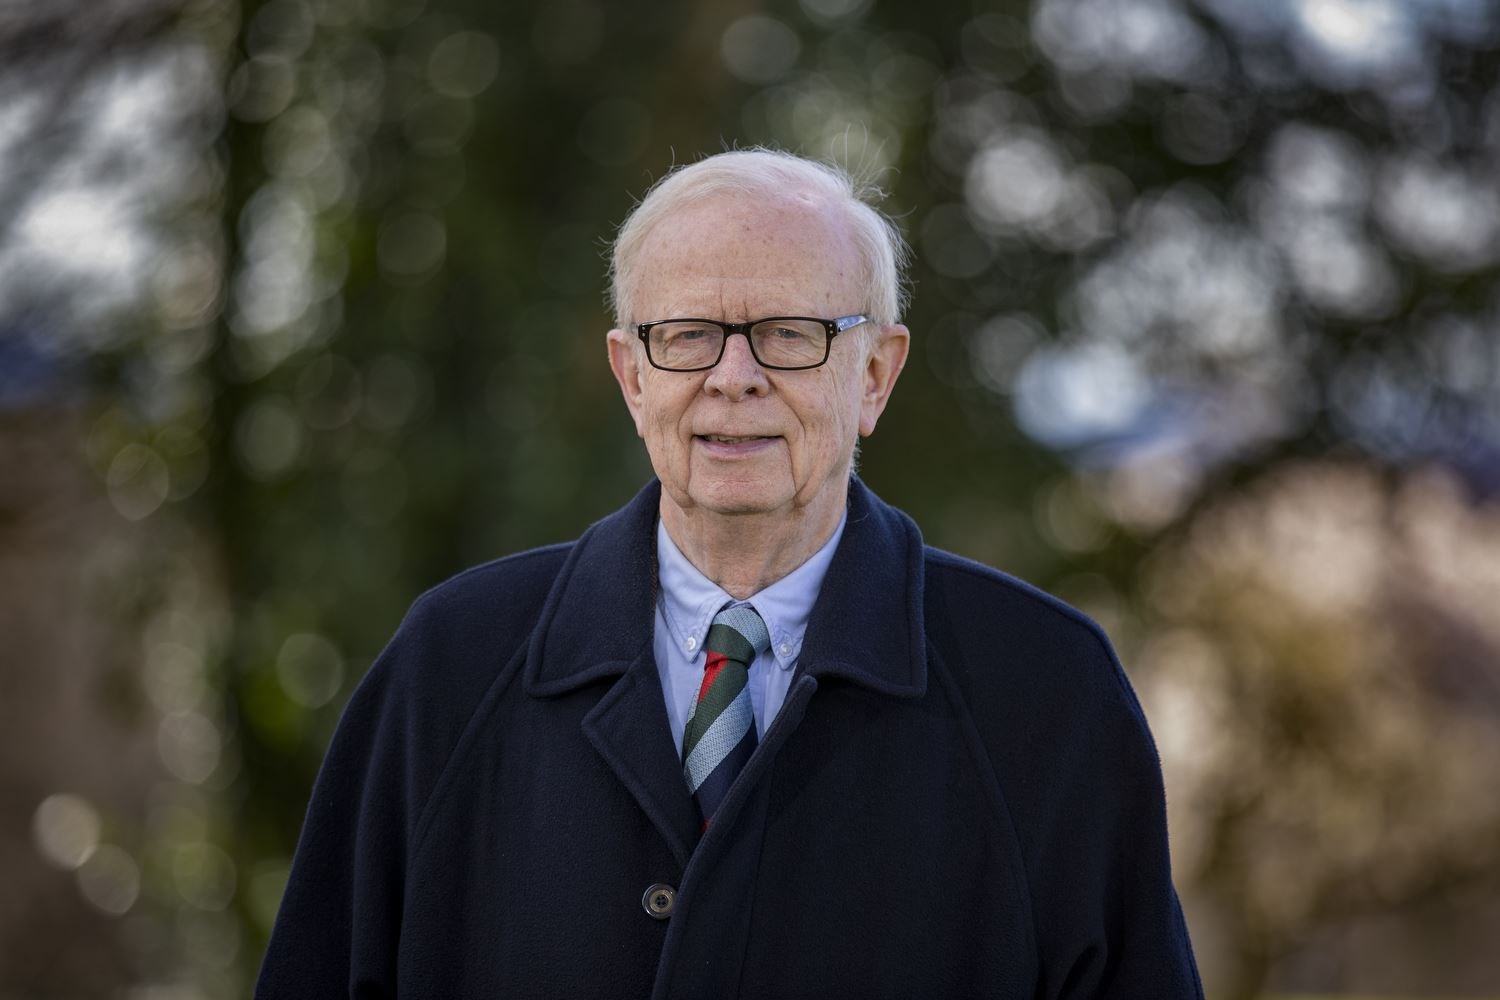 Lord Empey said the release of paramilitary prisoners and the reform of the RUC were among the most controversial parts of the Good Friday Agreement (Liam McBurney/PA)